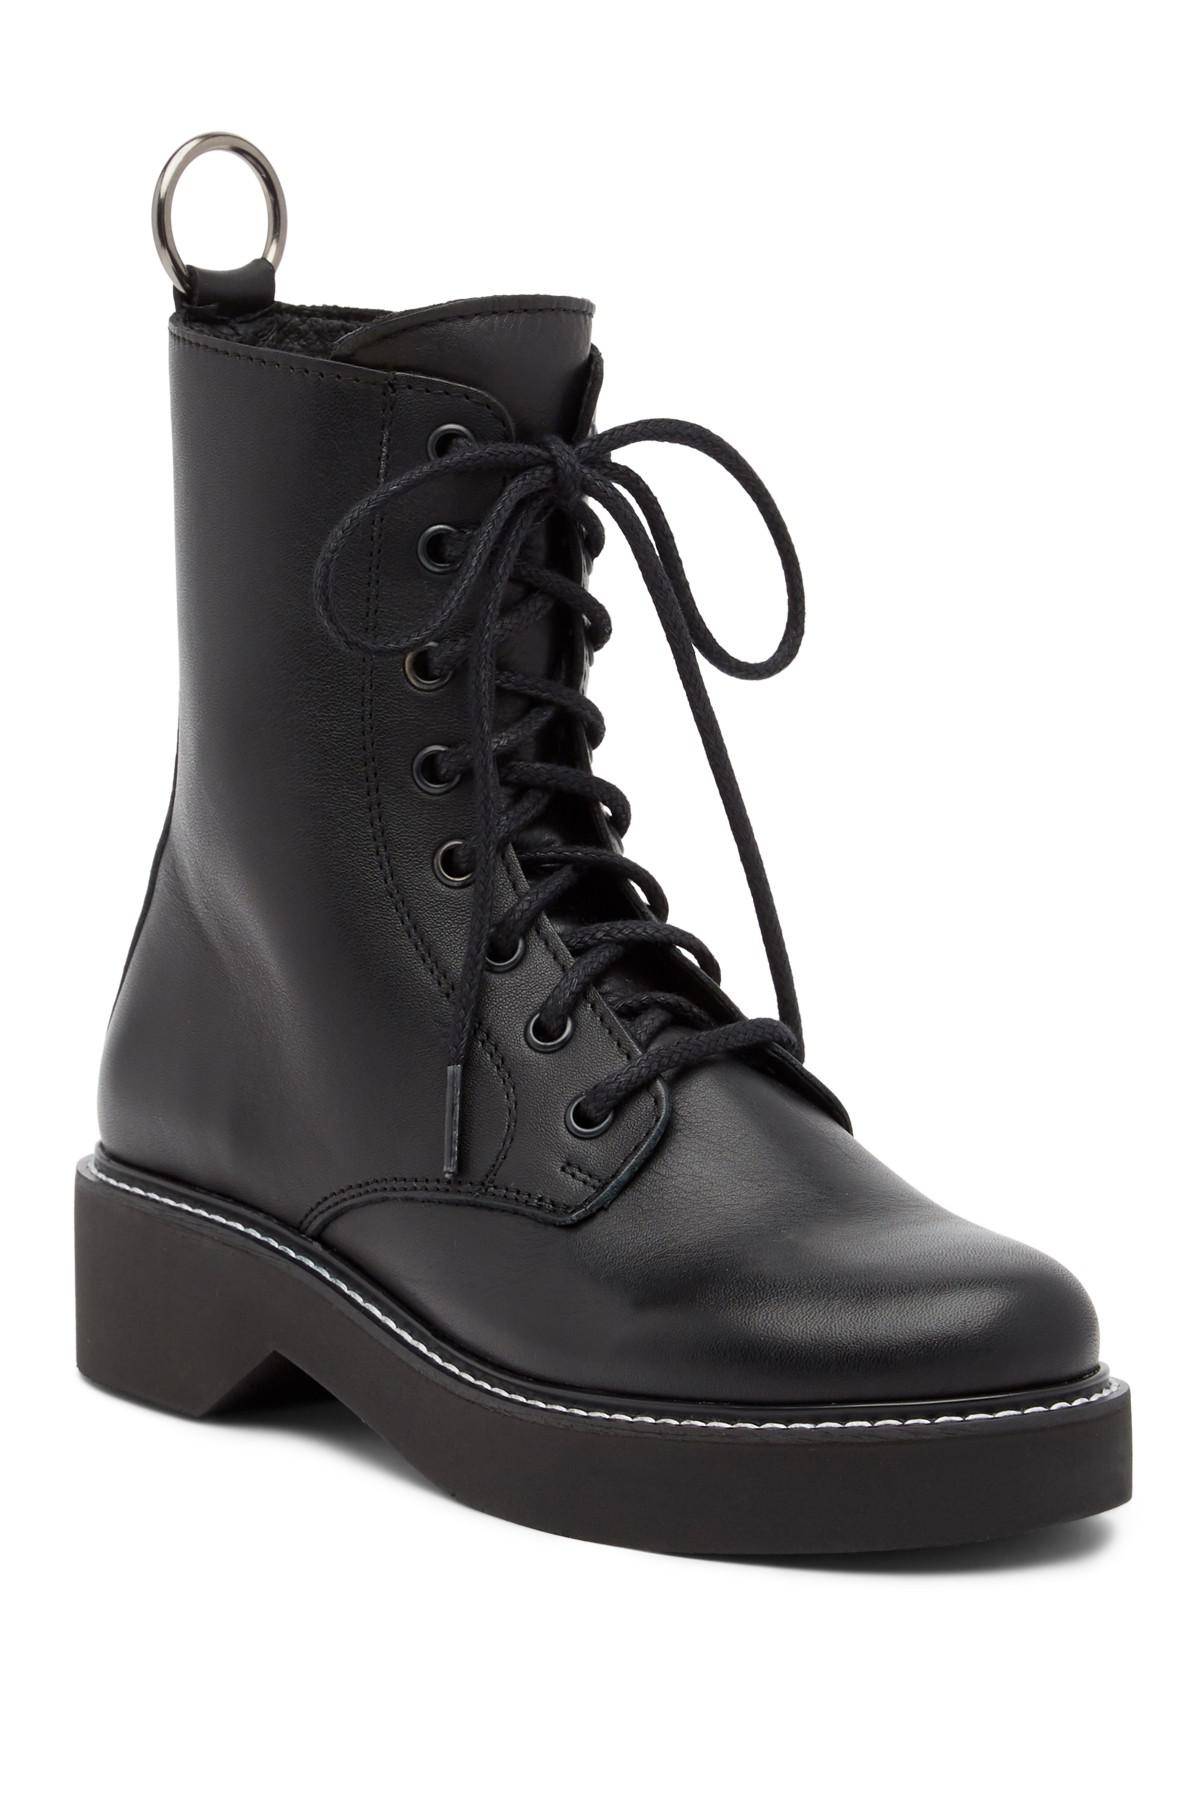 Steve Madden Leather Ryder Lace Up Combat Boot In Black For Men Lyst